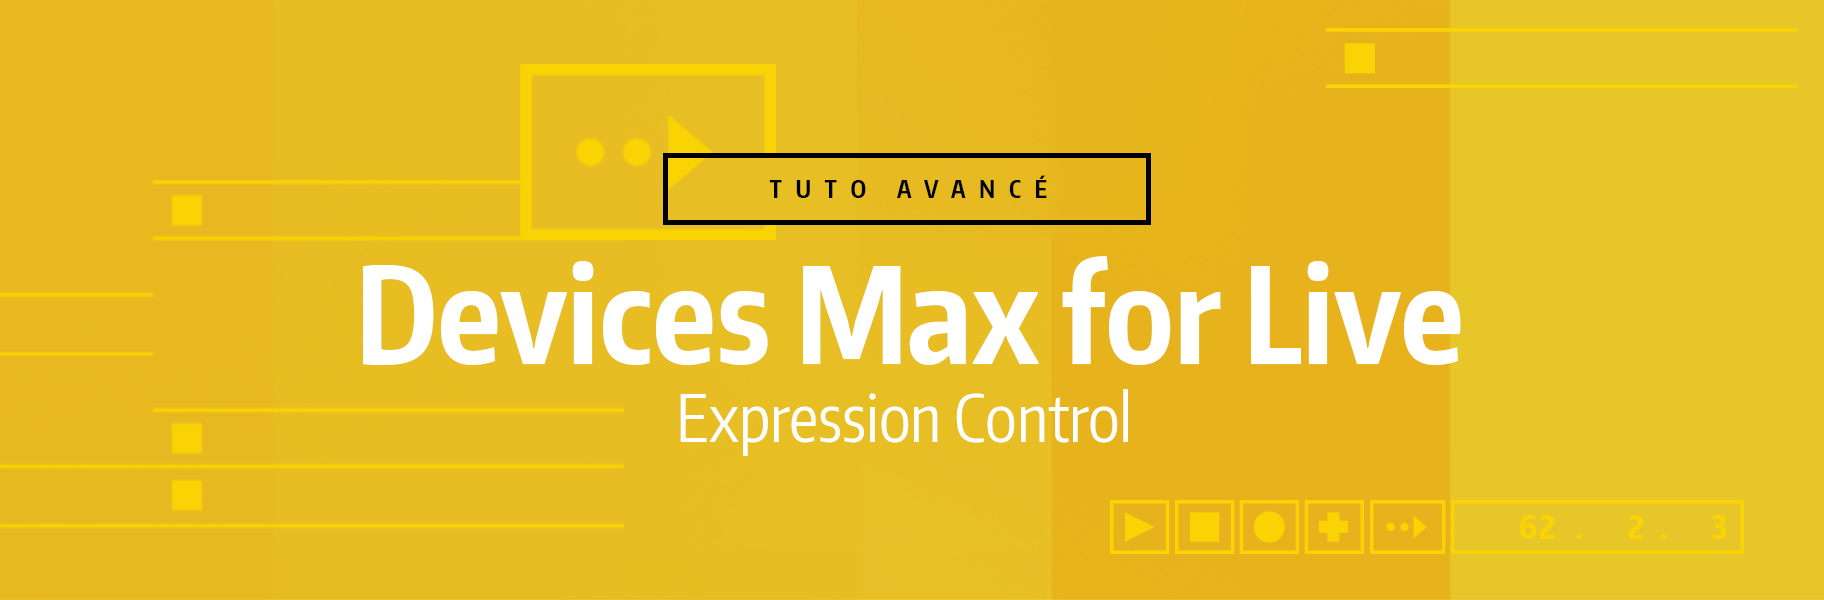 Tutoriel Ableton Live - Devices Max for Live - Expression Control